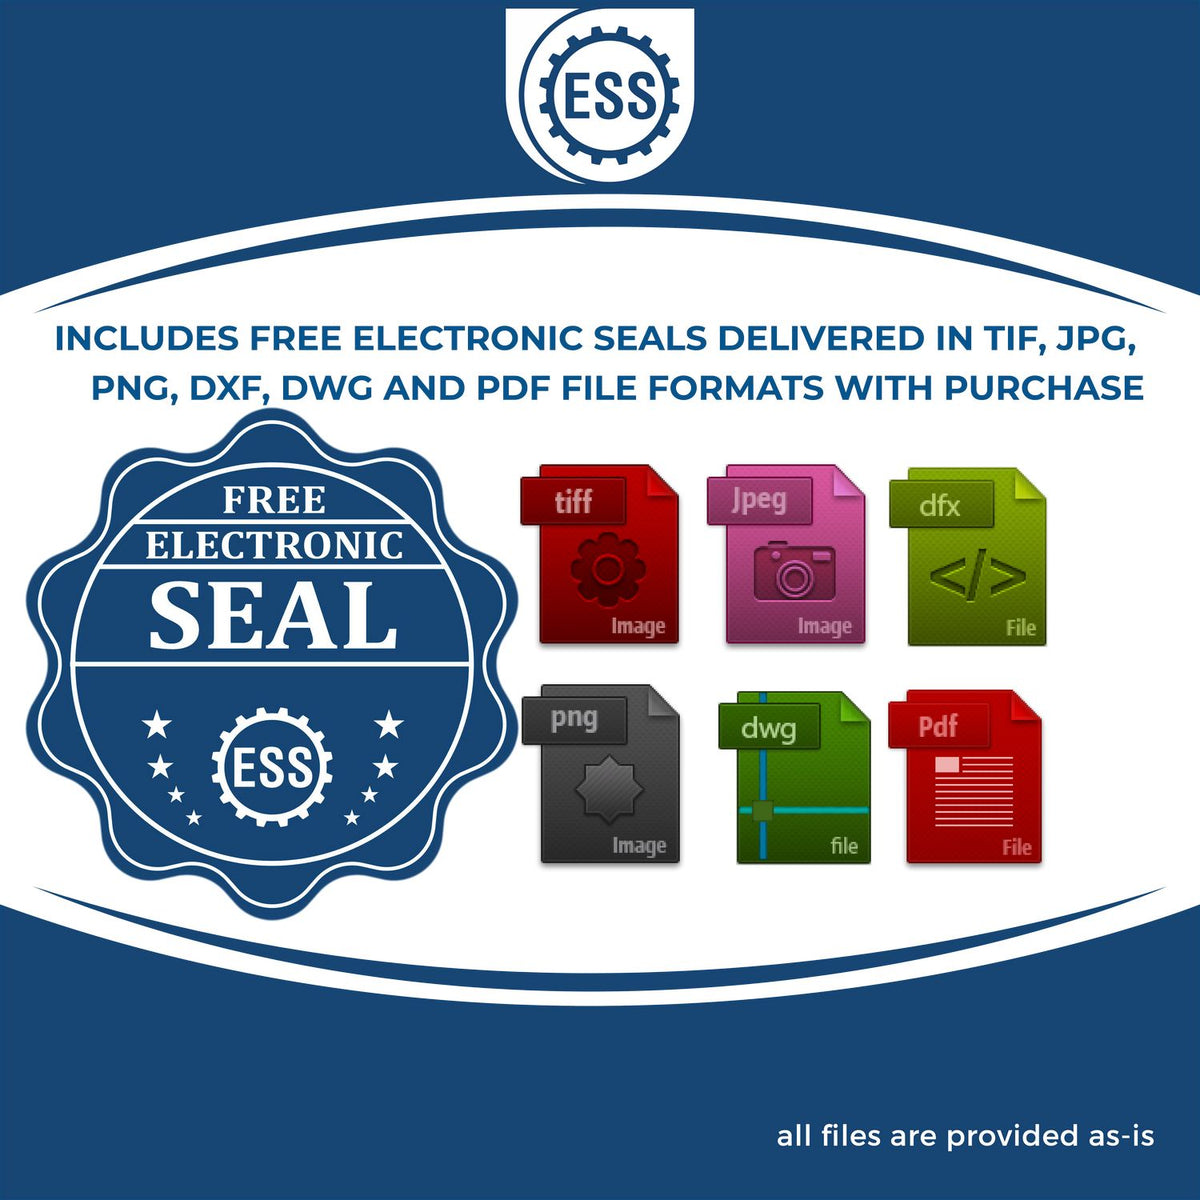 An infographic for the free electronic seal for the Self-Inking Arizona Landscape Architect Stamp illustrating the different file type icons such as DXF, DWG, TIF, JPG and PNG.